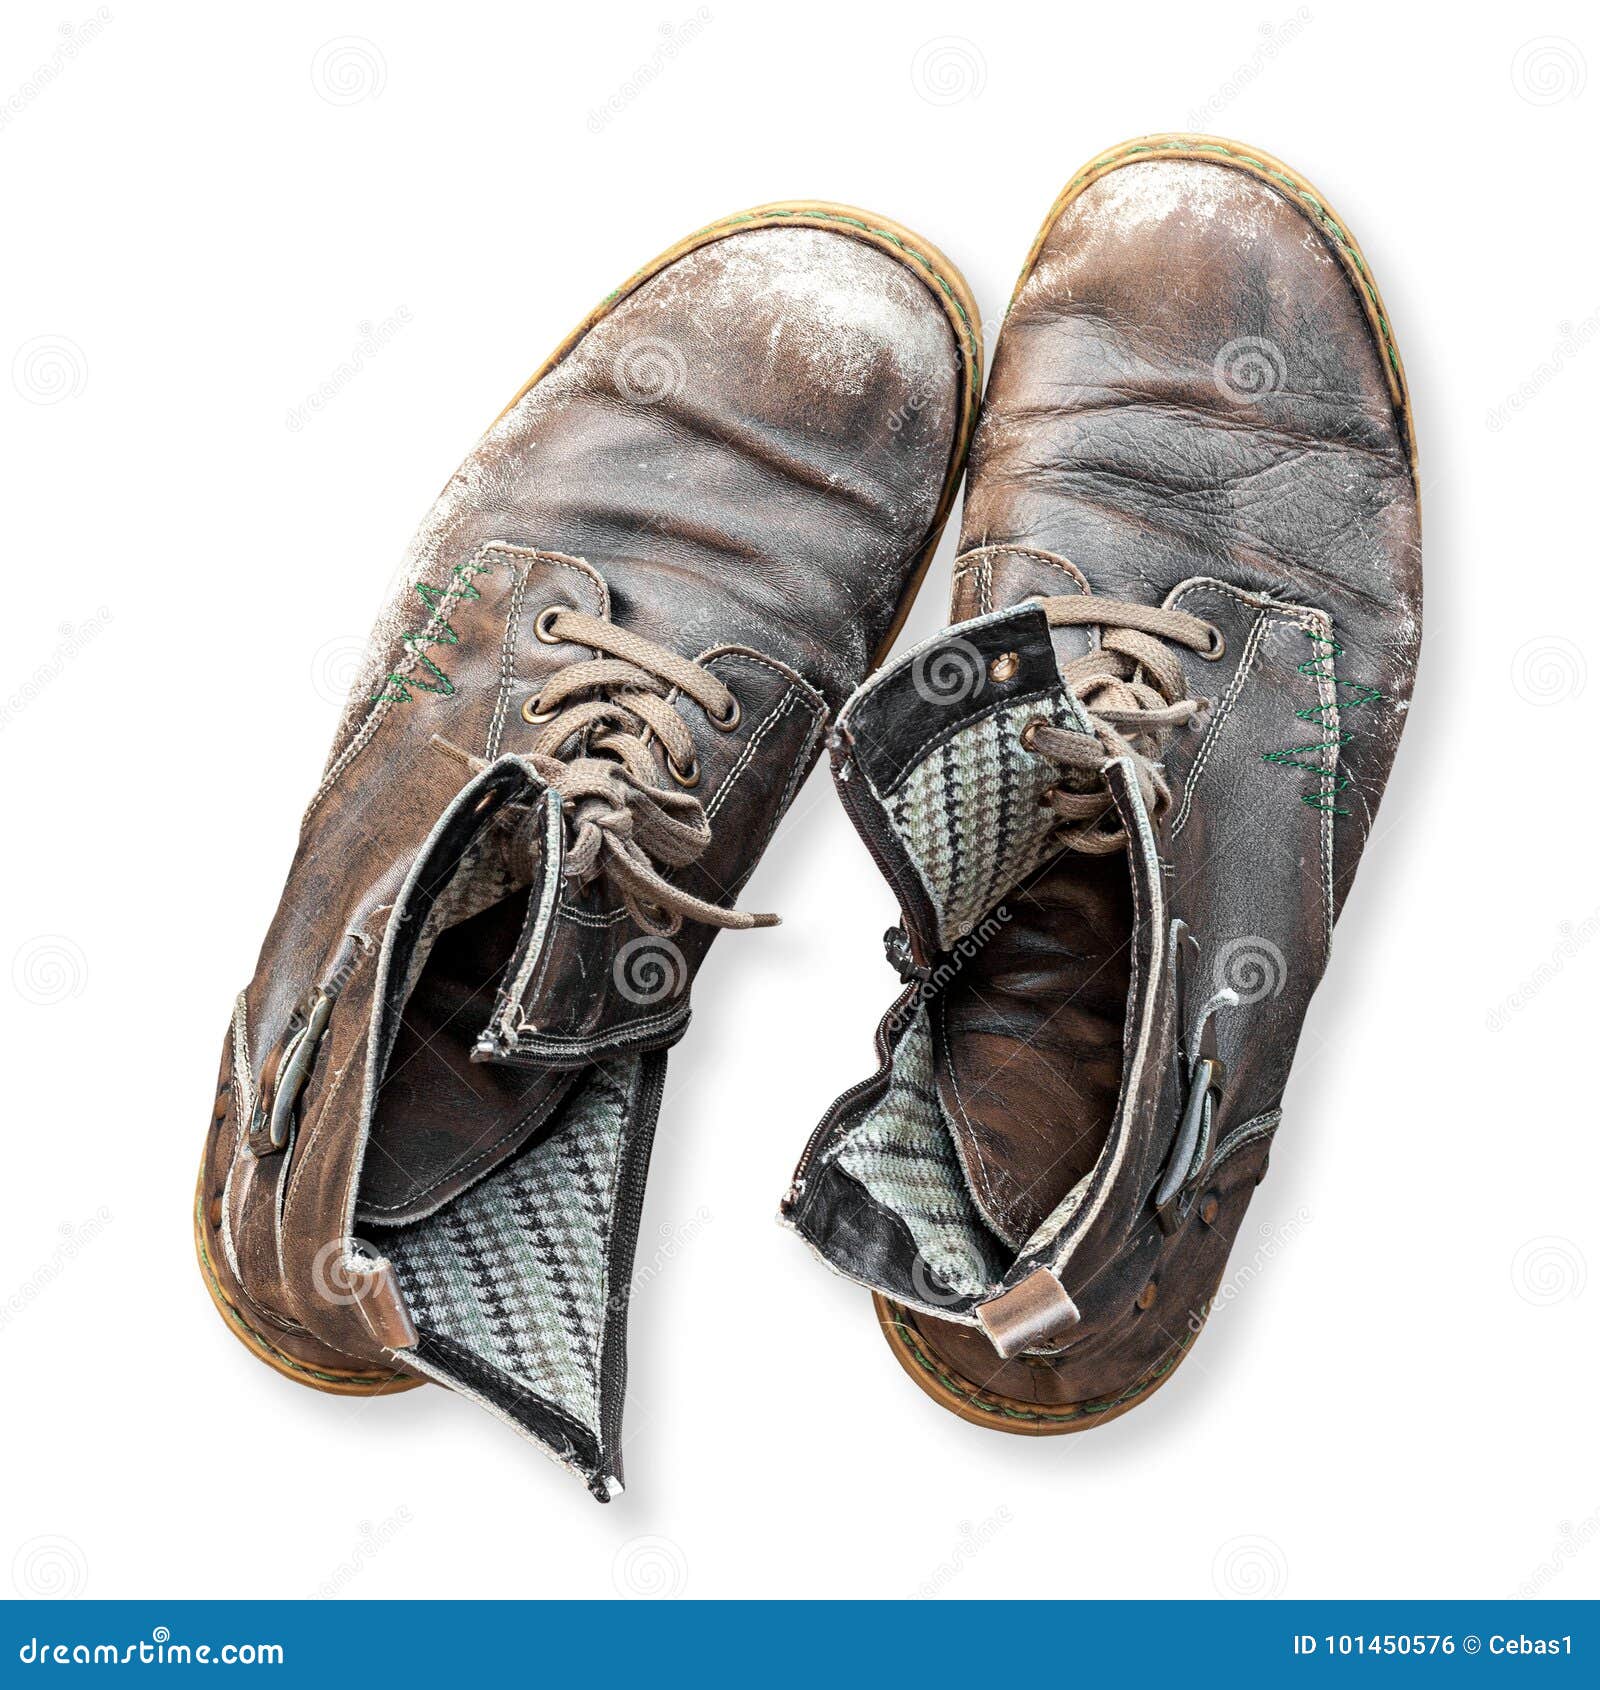 Pair of Old Boots Isolated on White Background Stock Photo - Image of ...